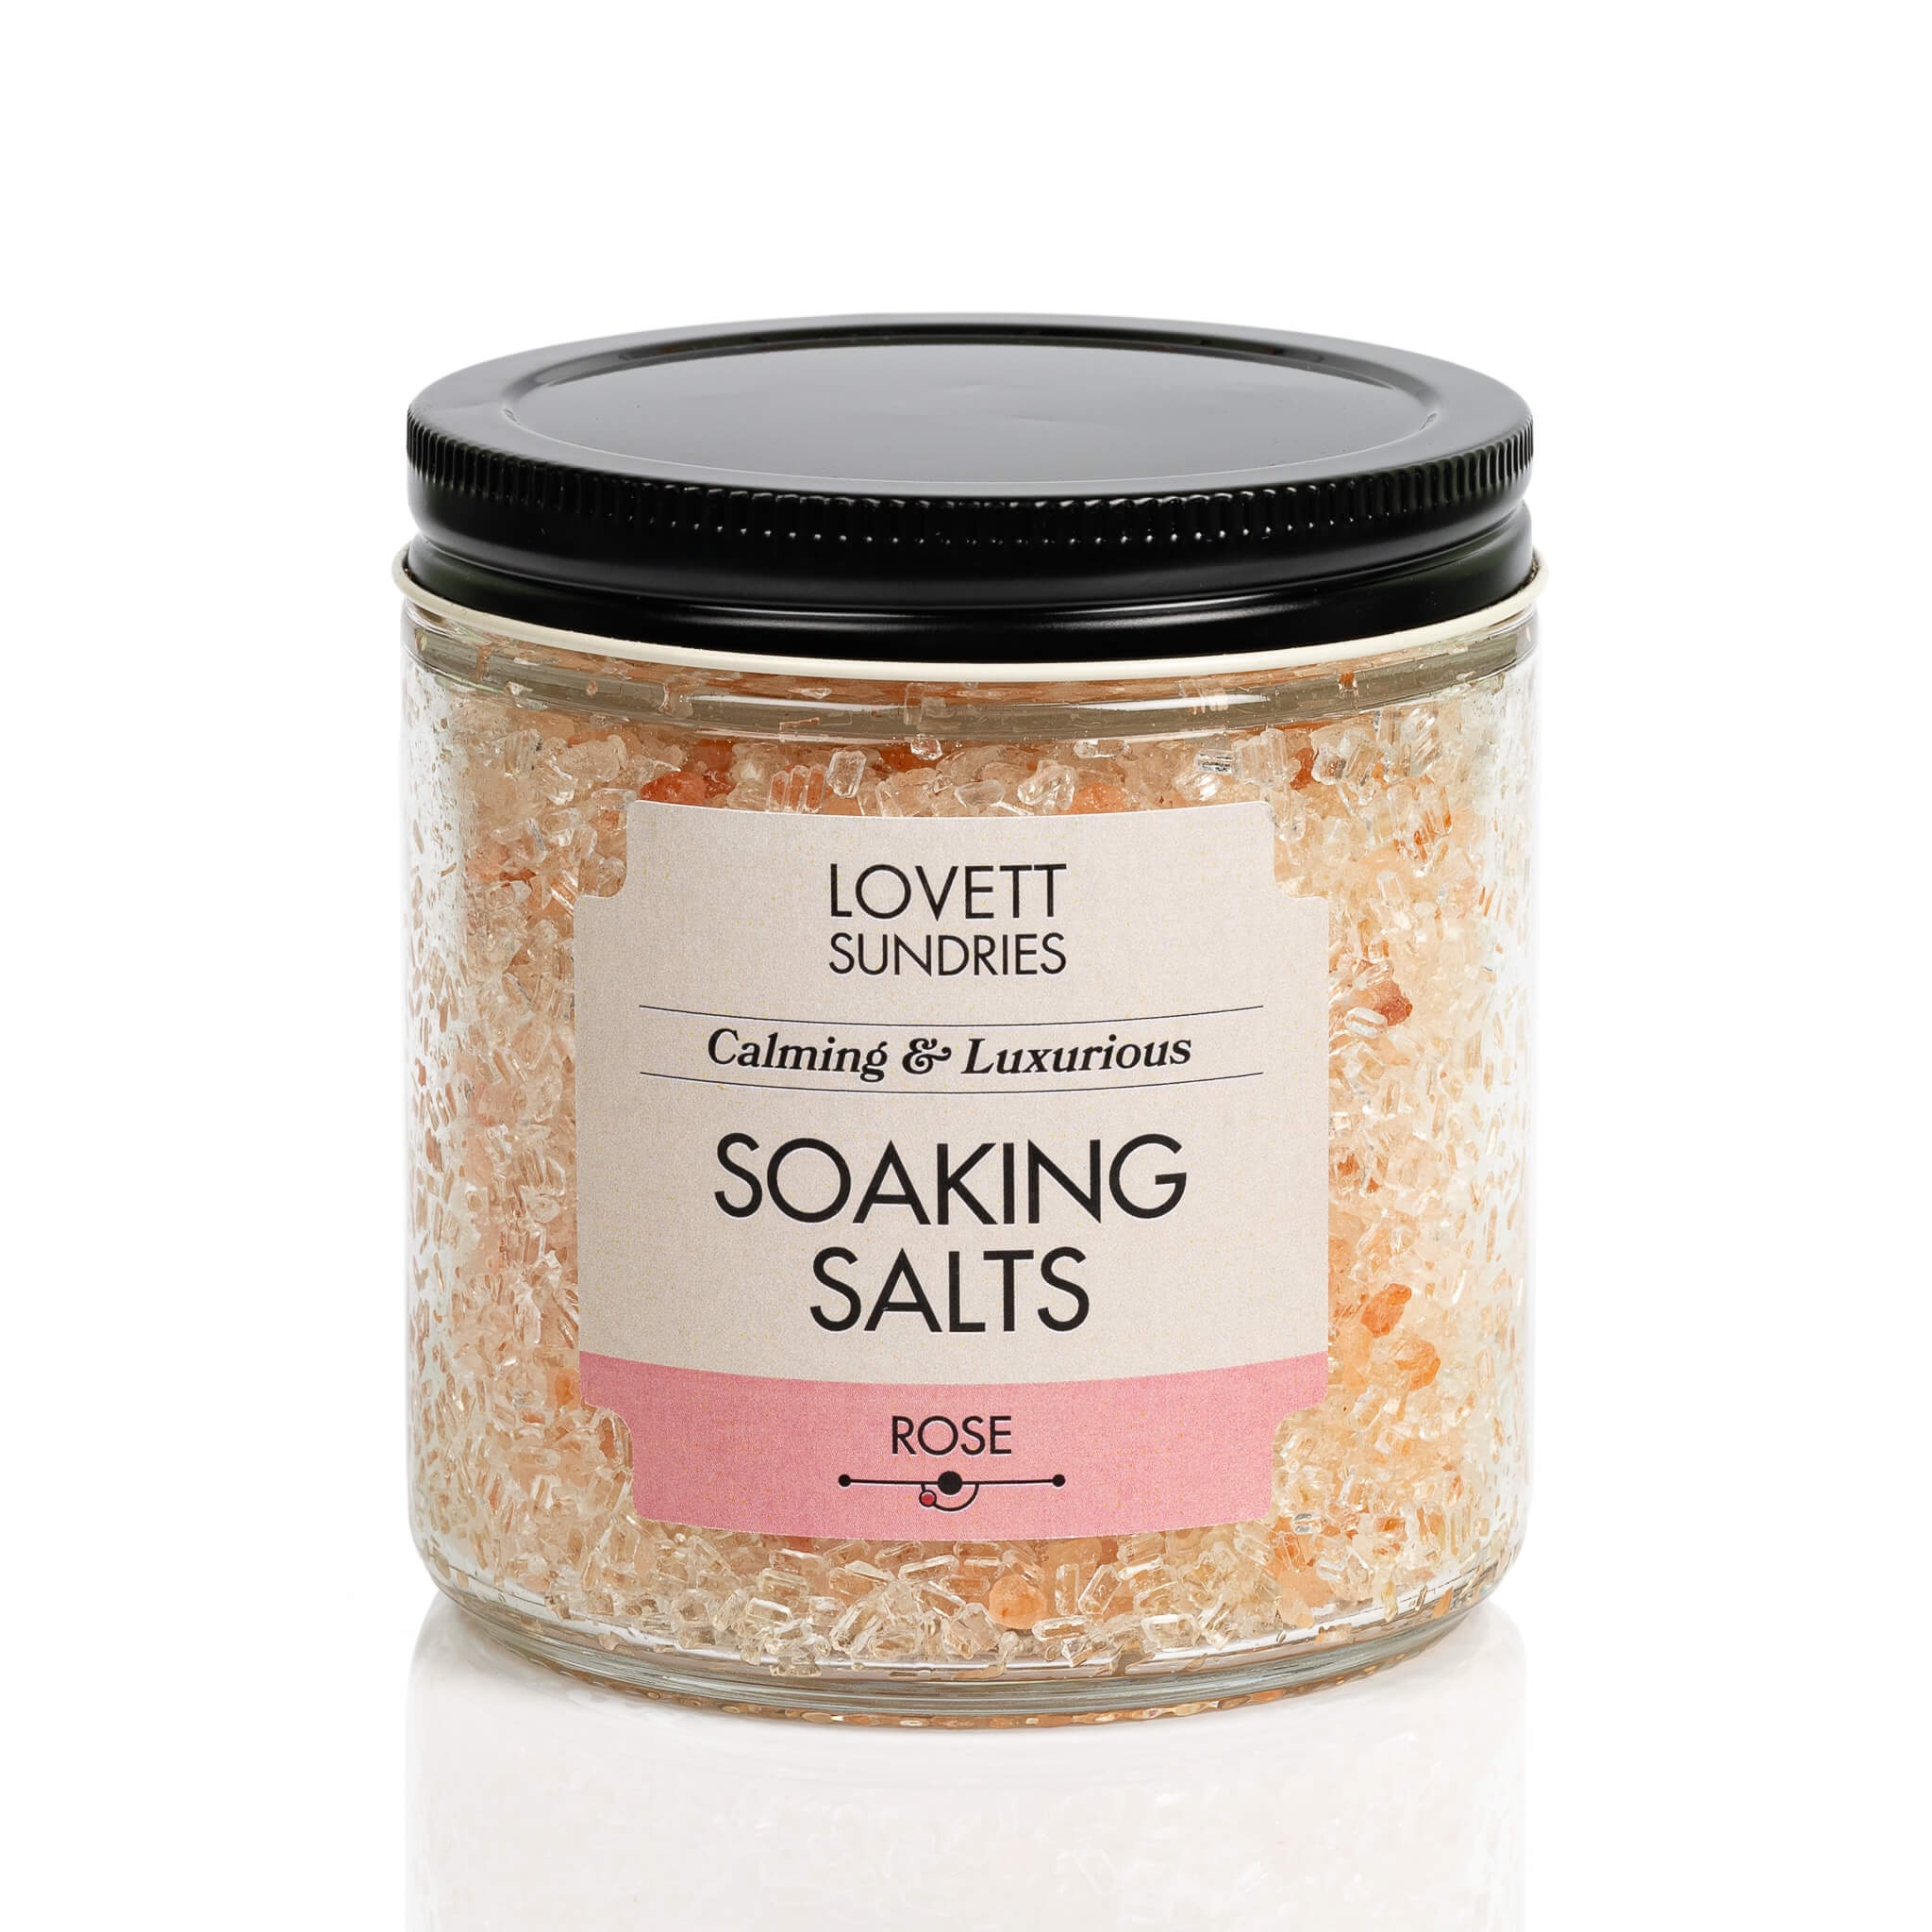 Rose scented all natural calming and luxurious bath soaking salts in a recyclable glass jar. 